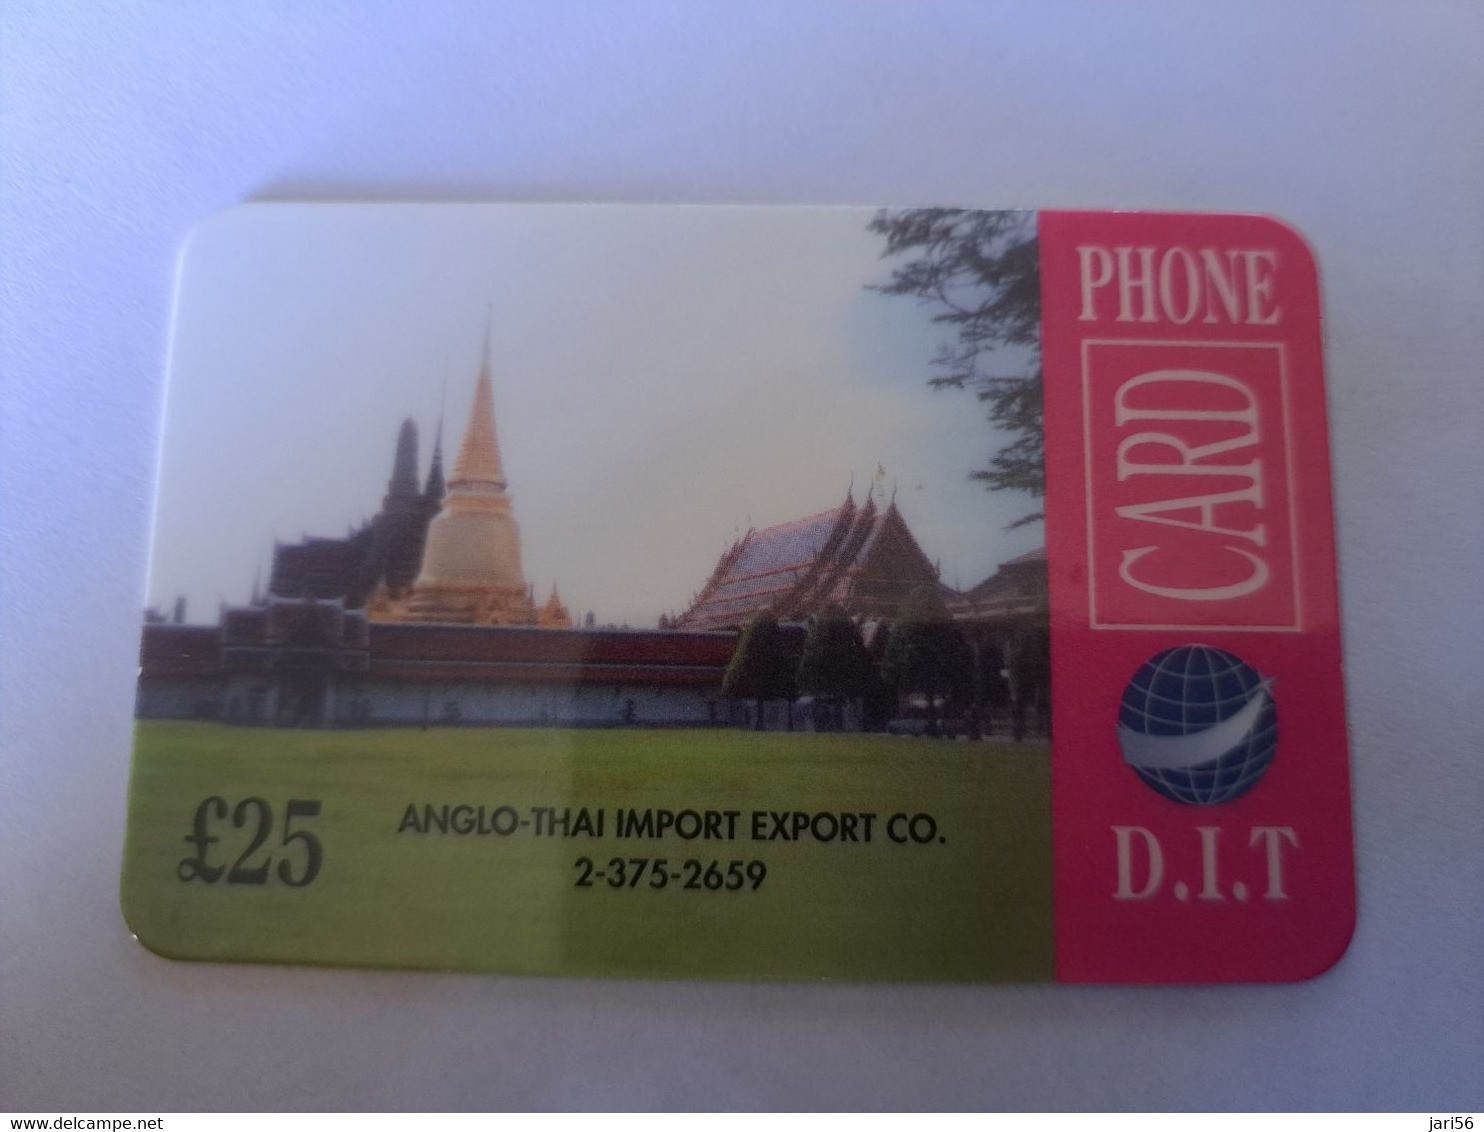 GREAT BRITAIN   25 POUND  / ANGLO- THAI IMPORT EXPORT  /    DIT PHONECARD    PREPAID CARD      **12124** - Collezioni